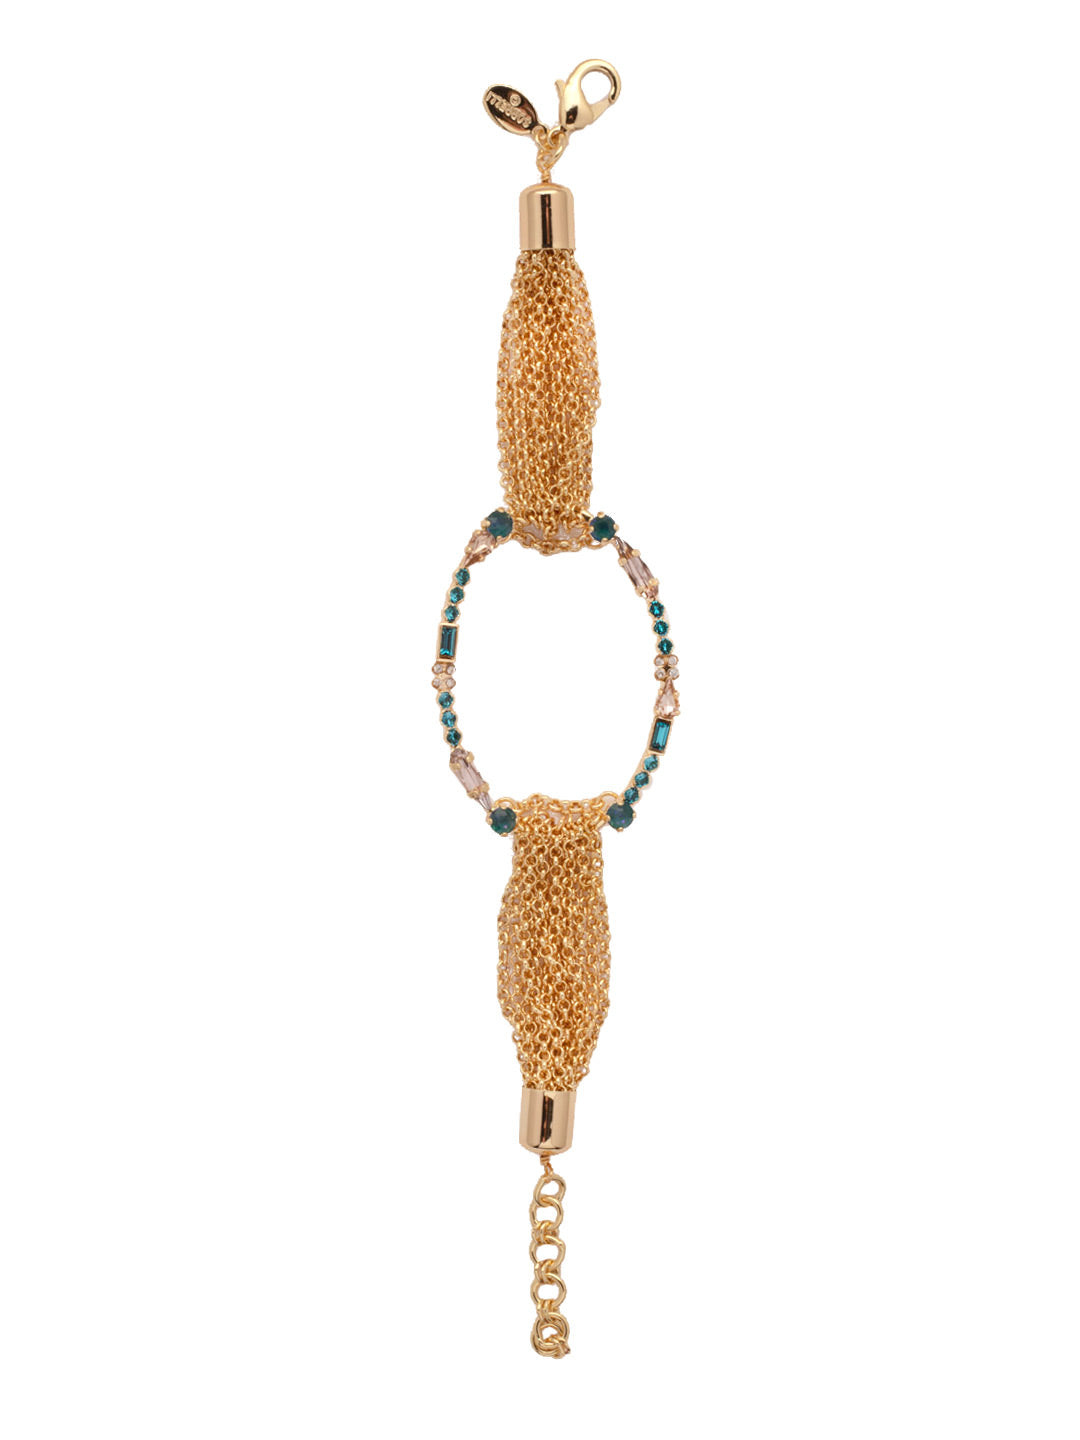 Ruth Statement Bracelet - BEU5BGSOP - <p>Feeling a bit edgy? Put on the Ruth Statement Bracelet featuring multi-strand metalwork and a circular center encrusted in sparkling crystals. From Sorrelli's South Pacific collection in our Bright Gold-tone finish.</p>